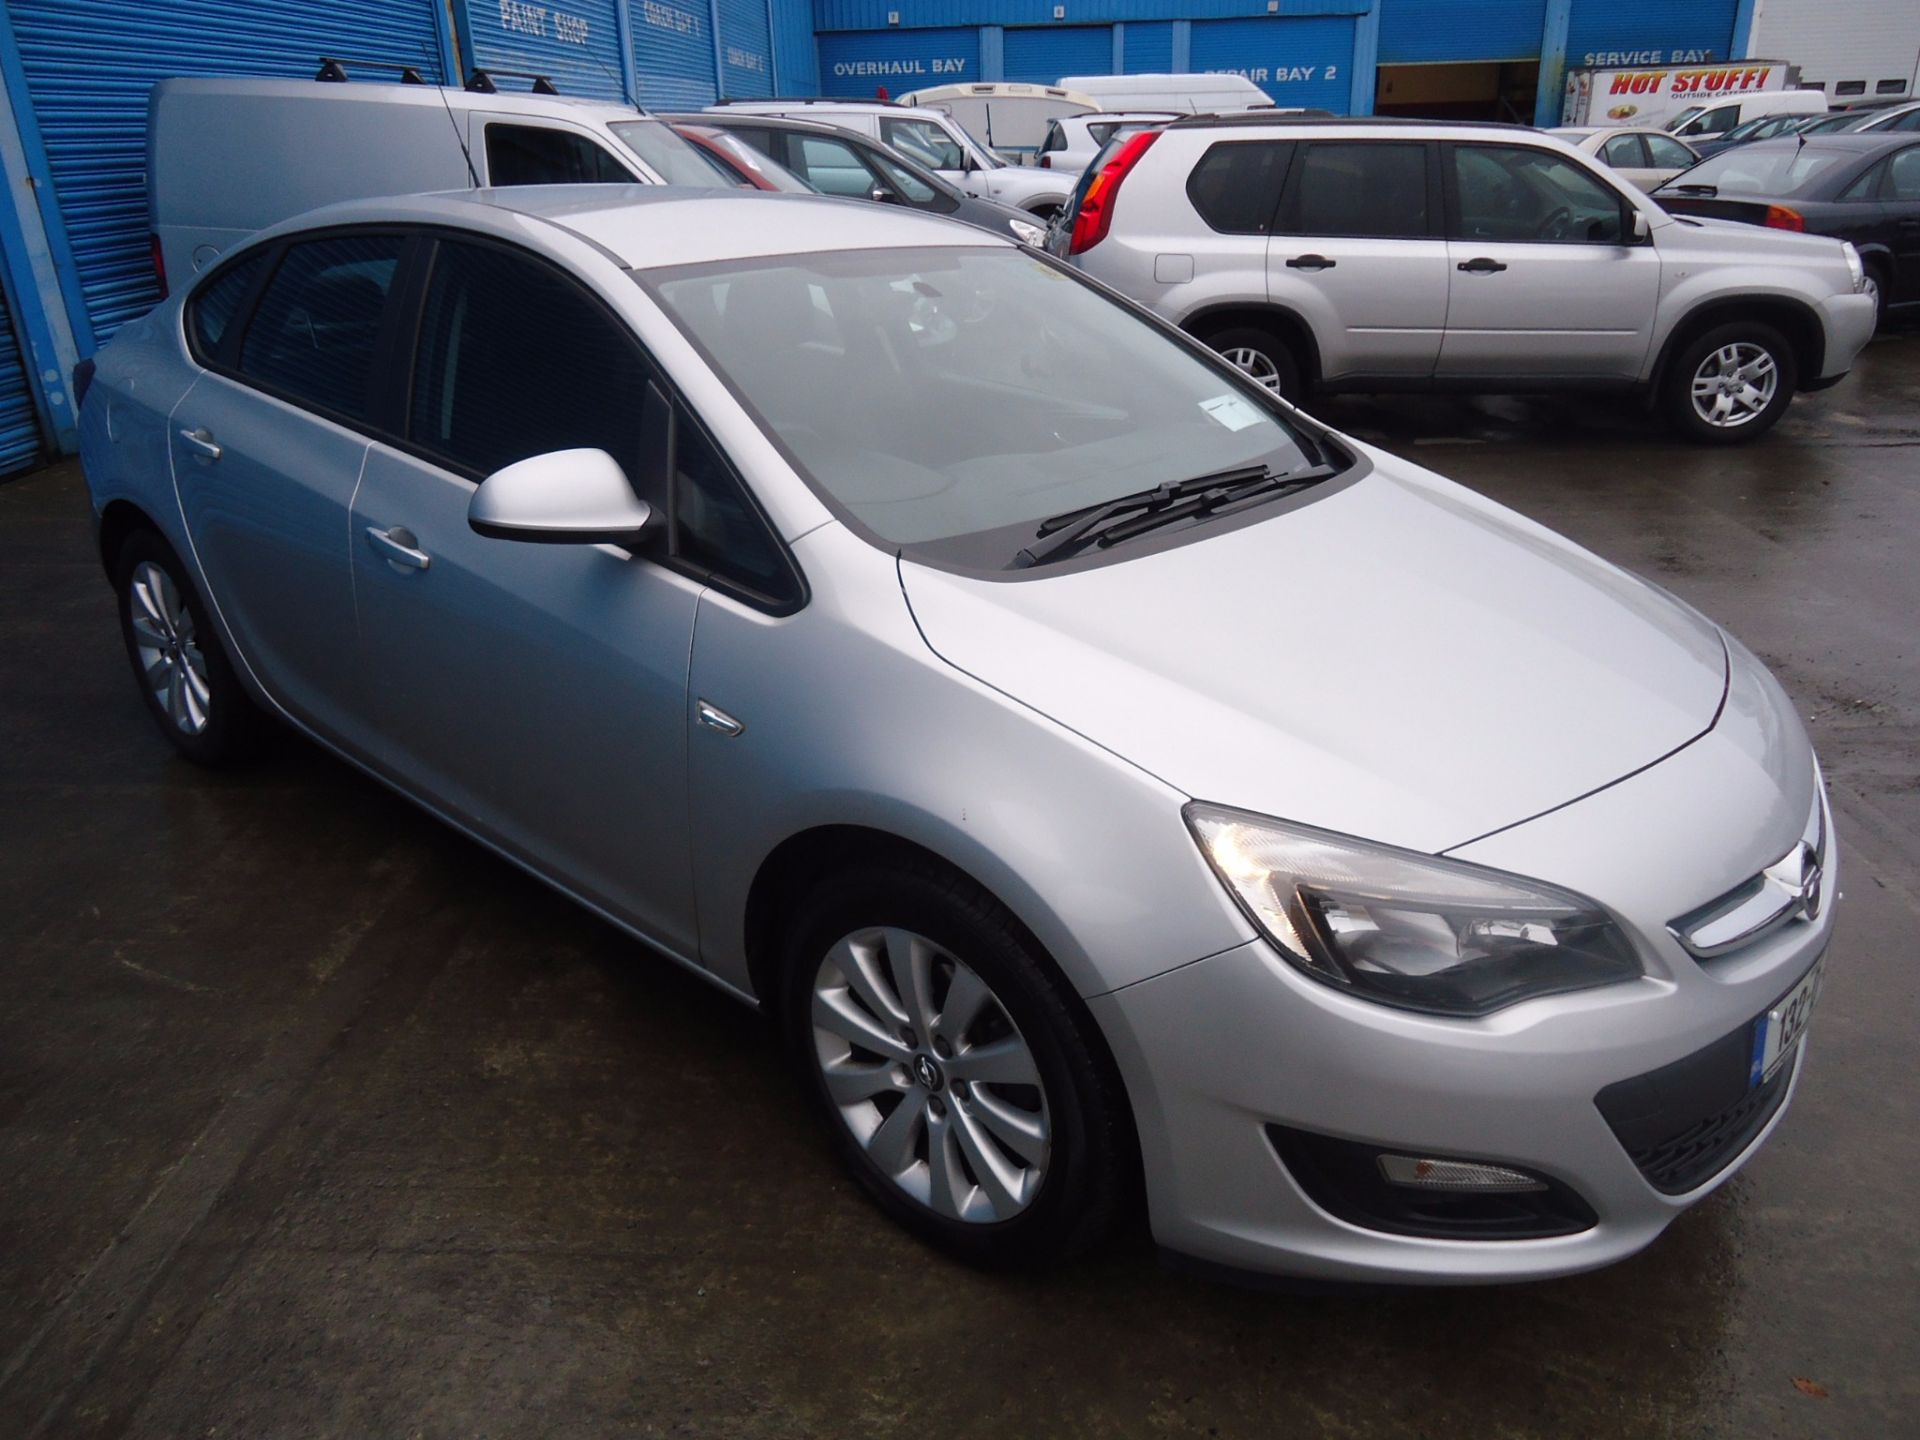 132D4617 Opel Astra - Image 2 of 6